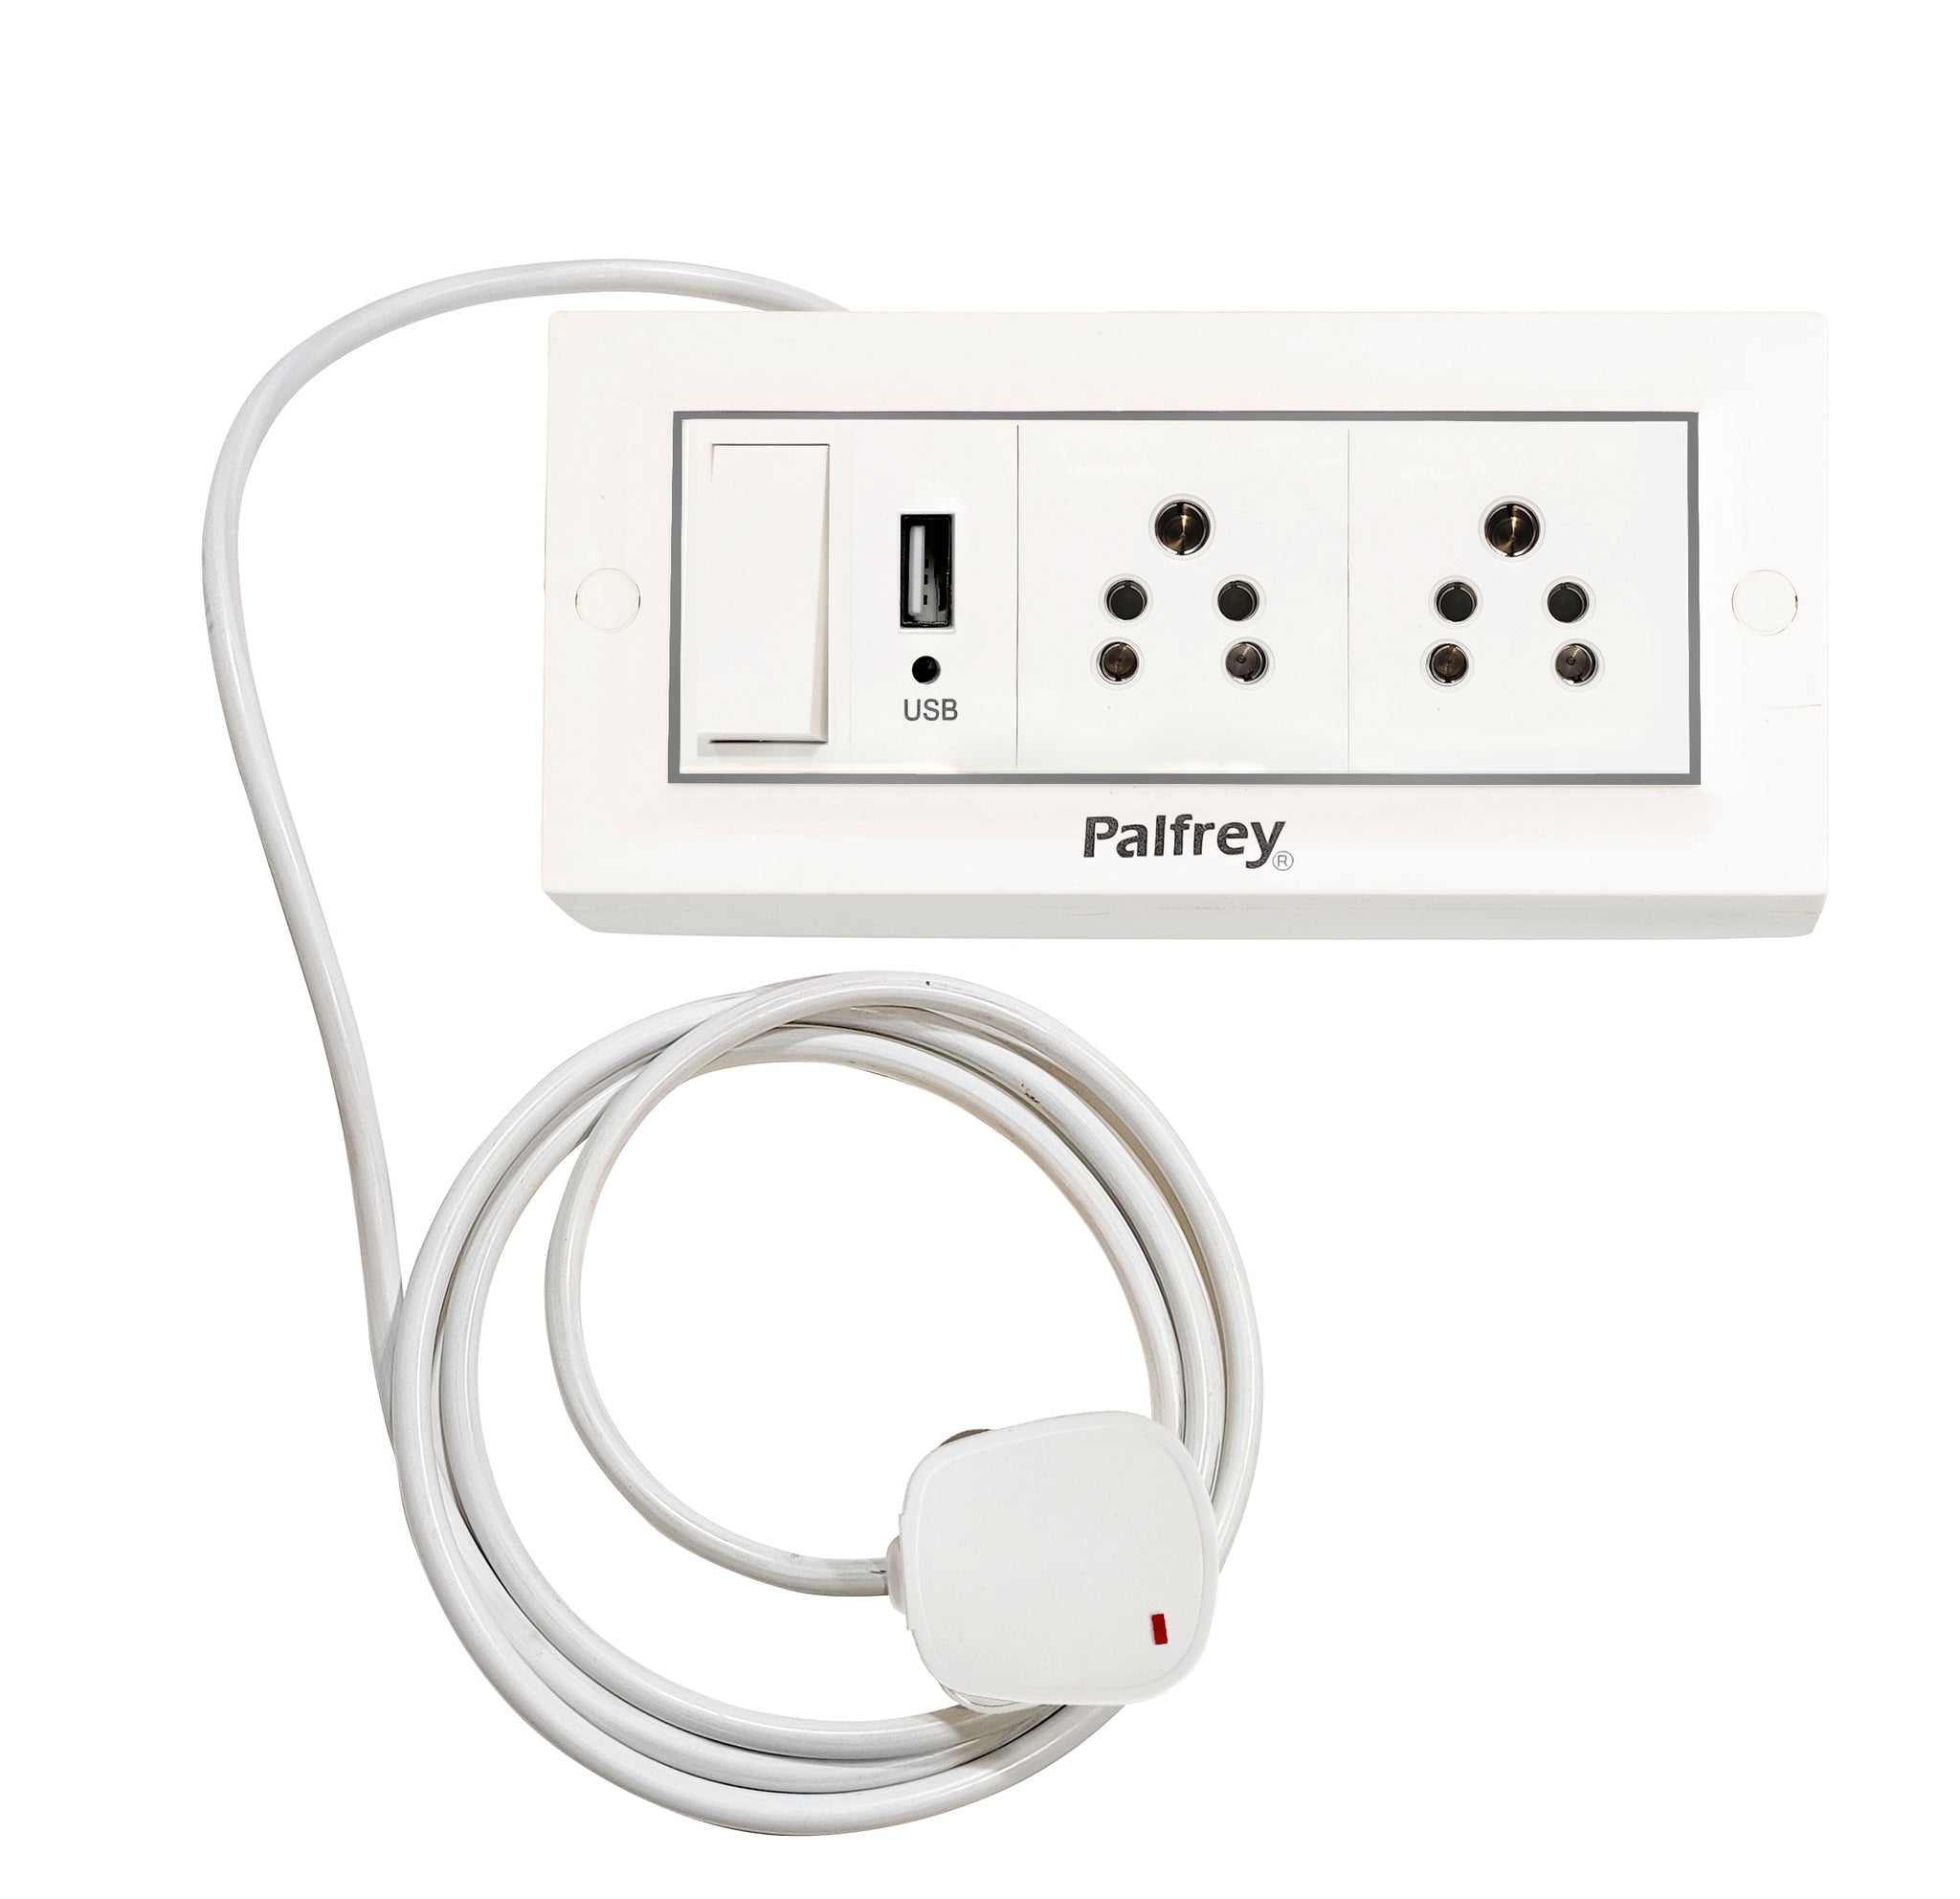 Palfrey Electric Extension Board - 5A + 5A + 1 USB Socket with Master Switch and Heavy Duty Wire (White)